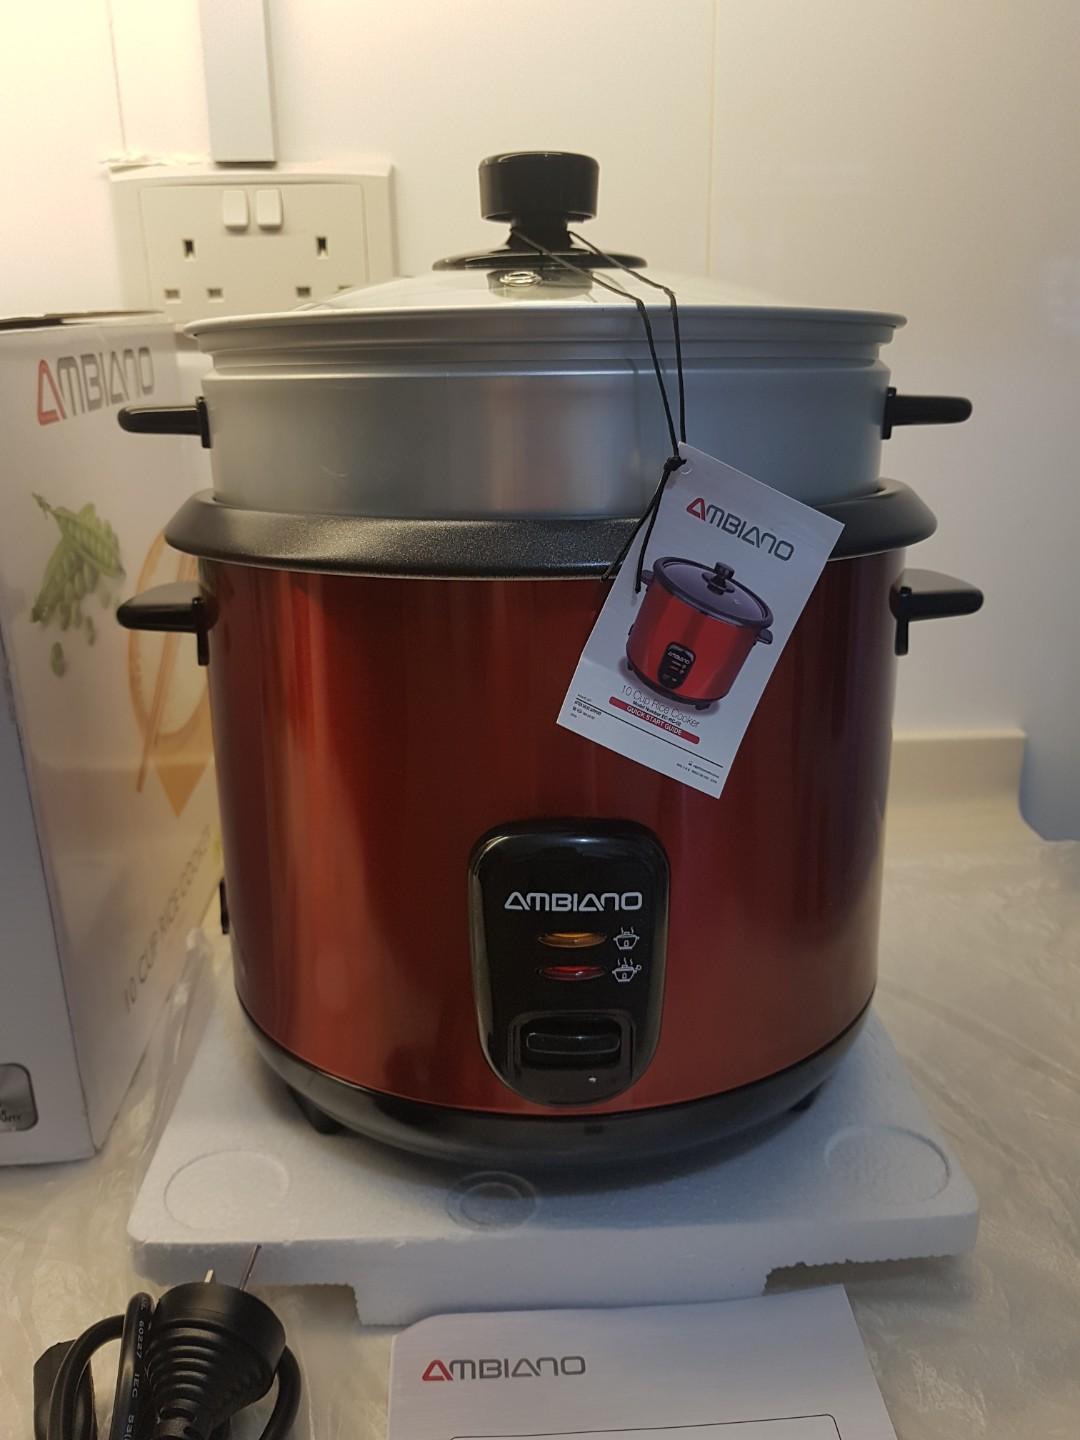 Ambiano 10 Cup 1 8l Rice Cooker With Steamer Tray 700w Limited Edition Colour Metallic Red From Australia Tv Home Appliances Kitchen Appliances Cookers On Carousell